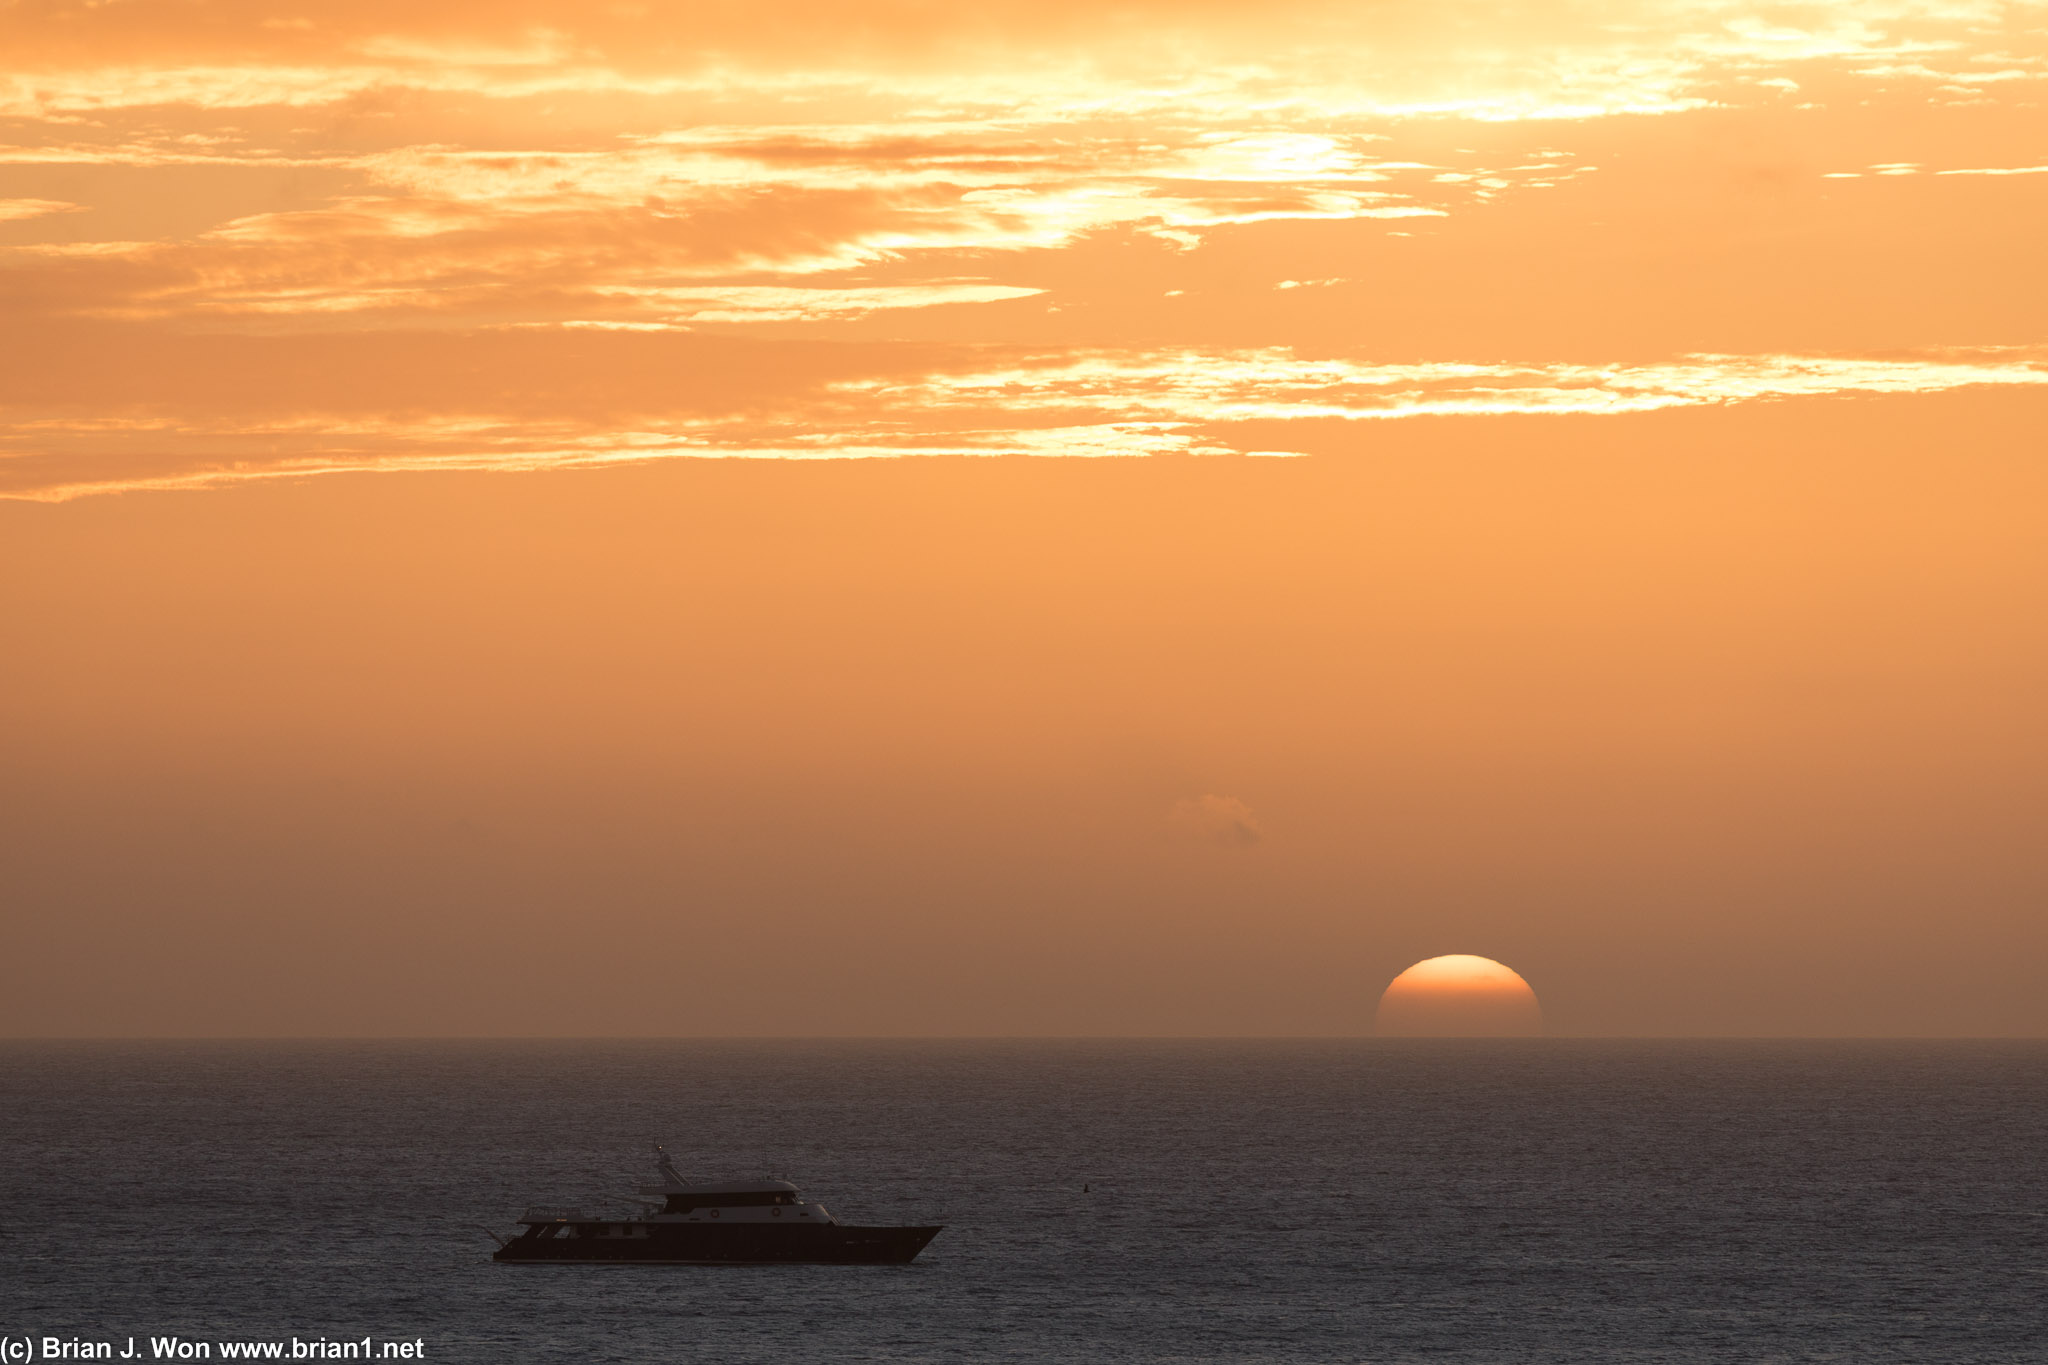 A solitary boat watches the sunset.